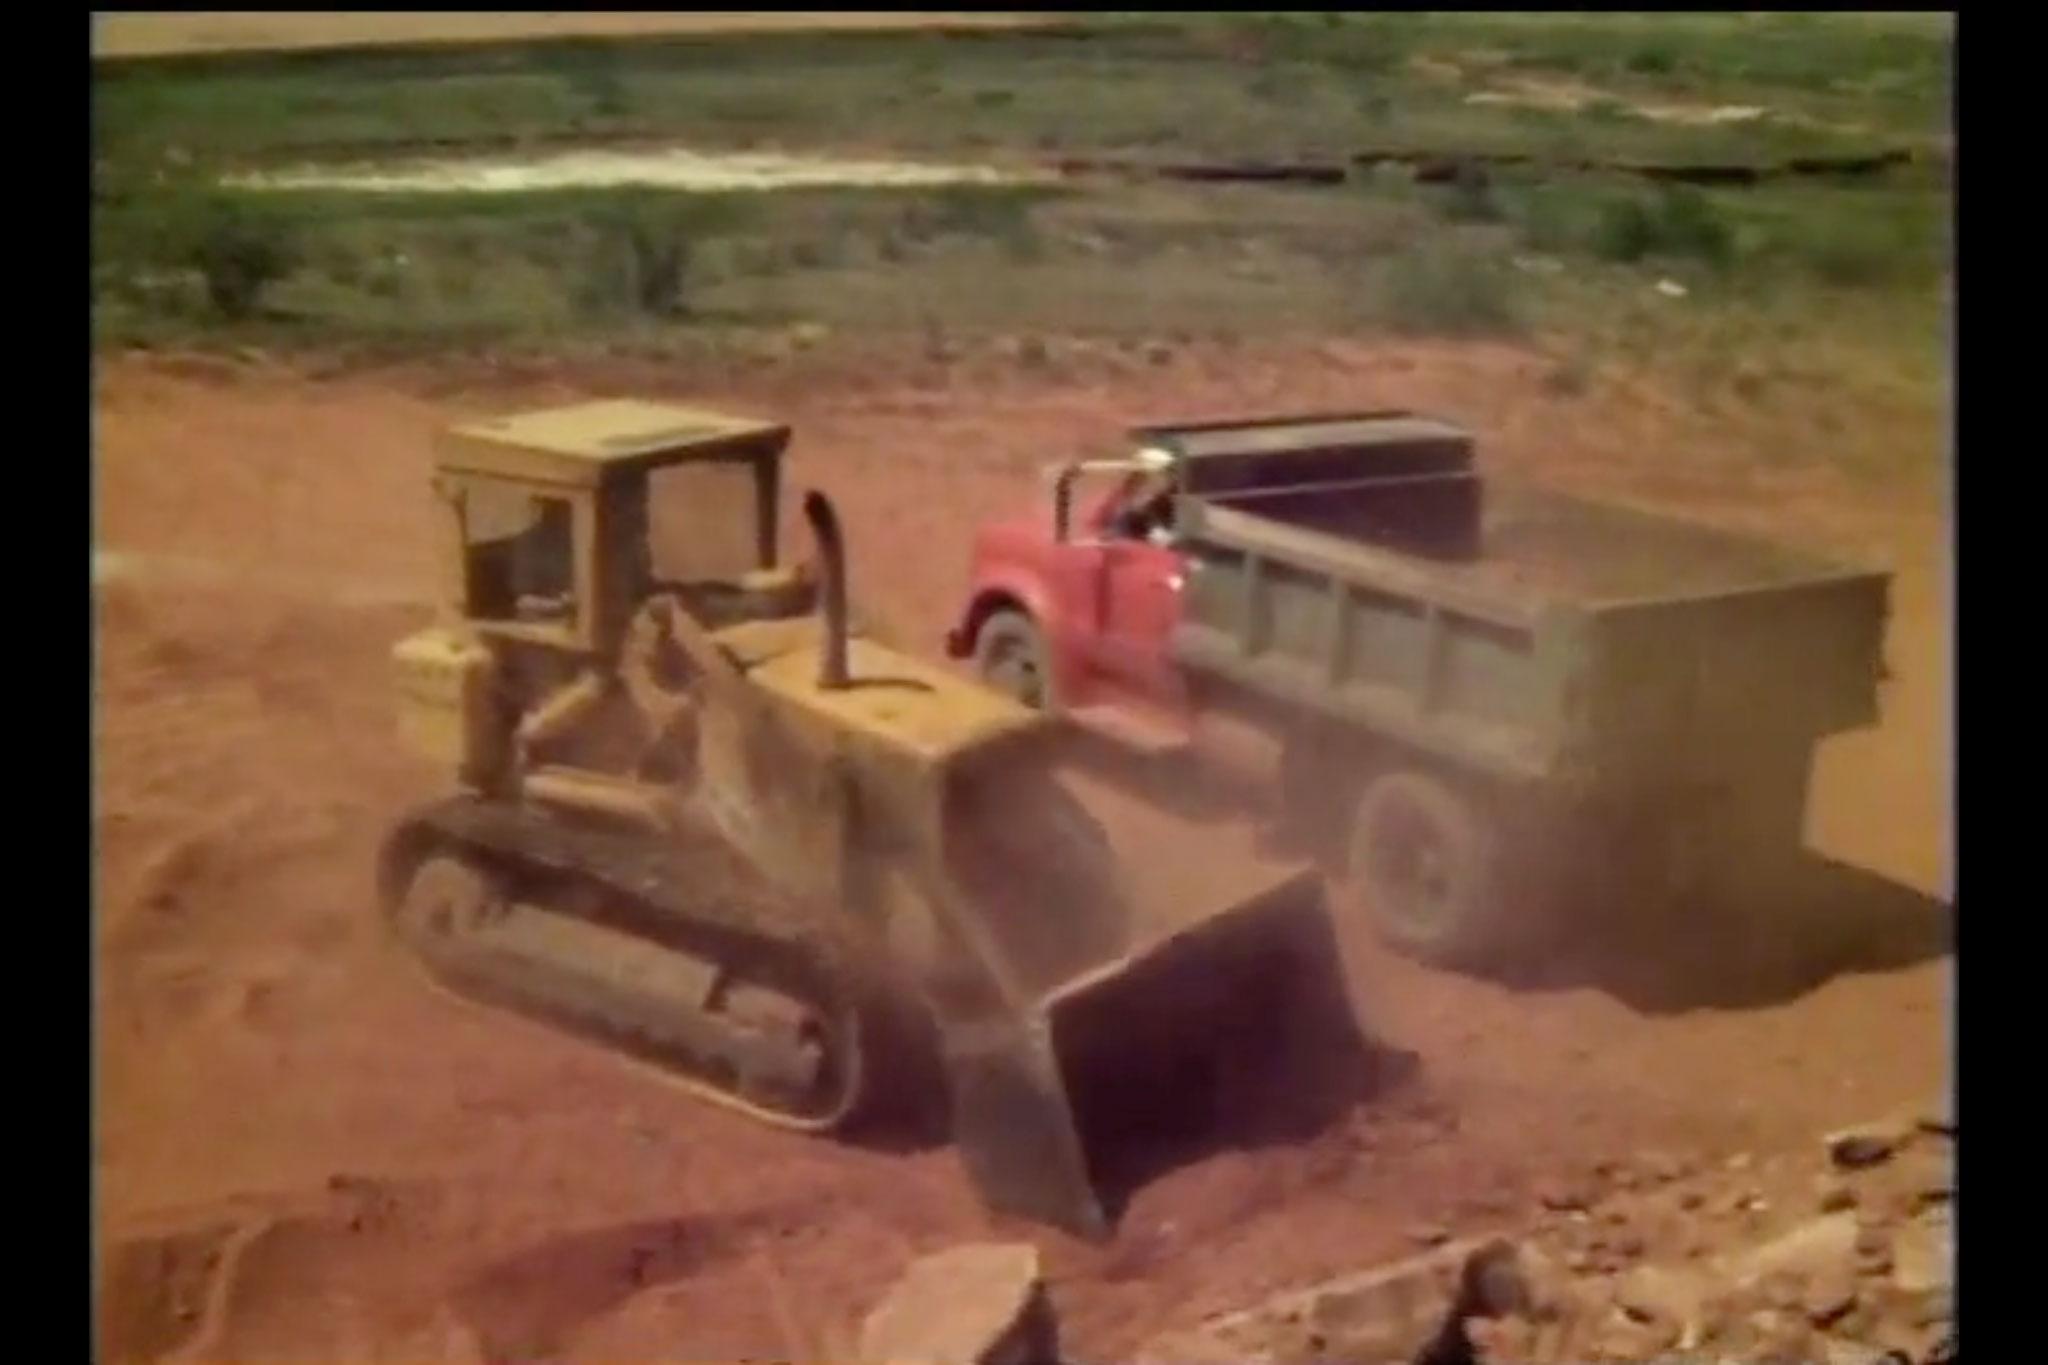 A yellow front loader and a red dump truck driving past each other